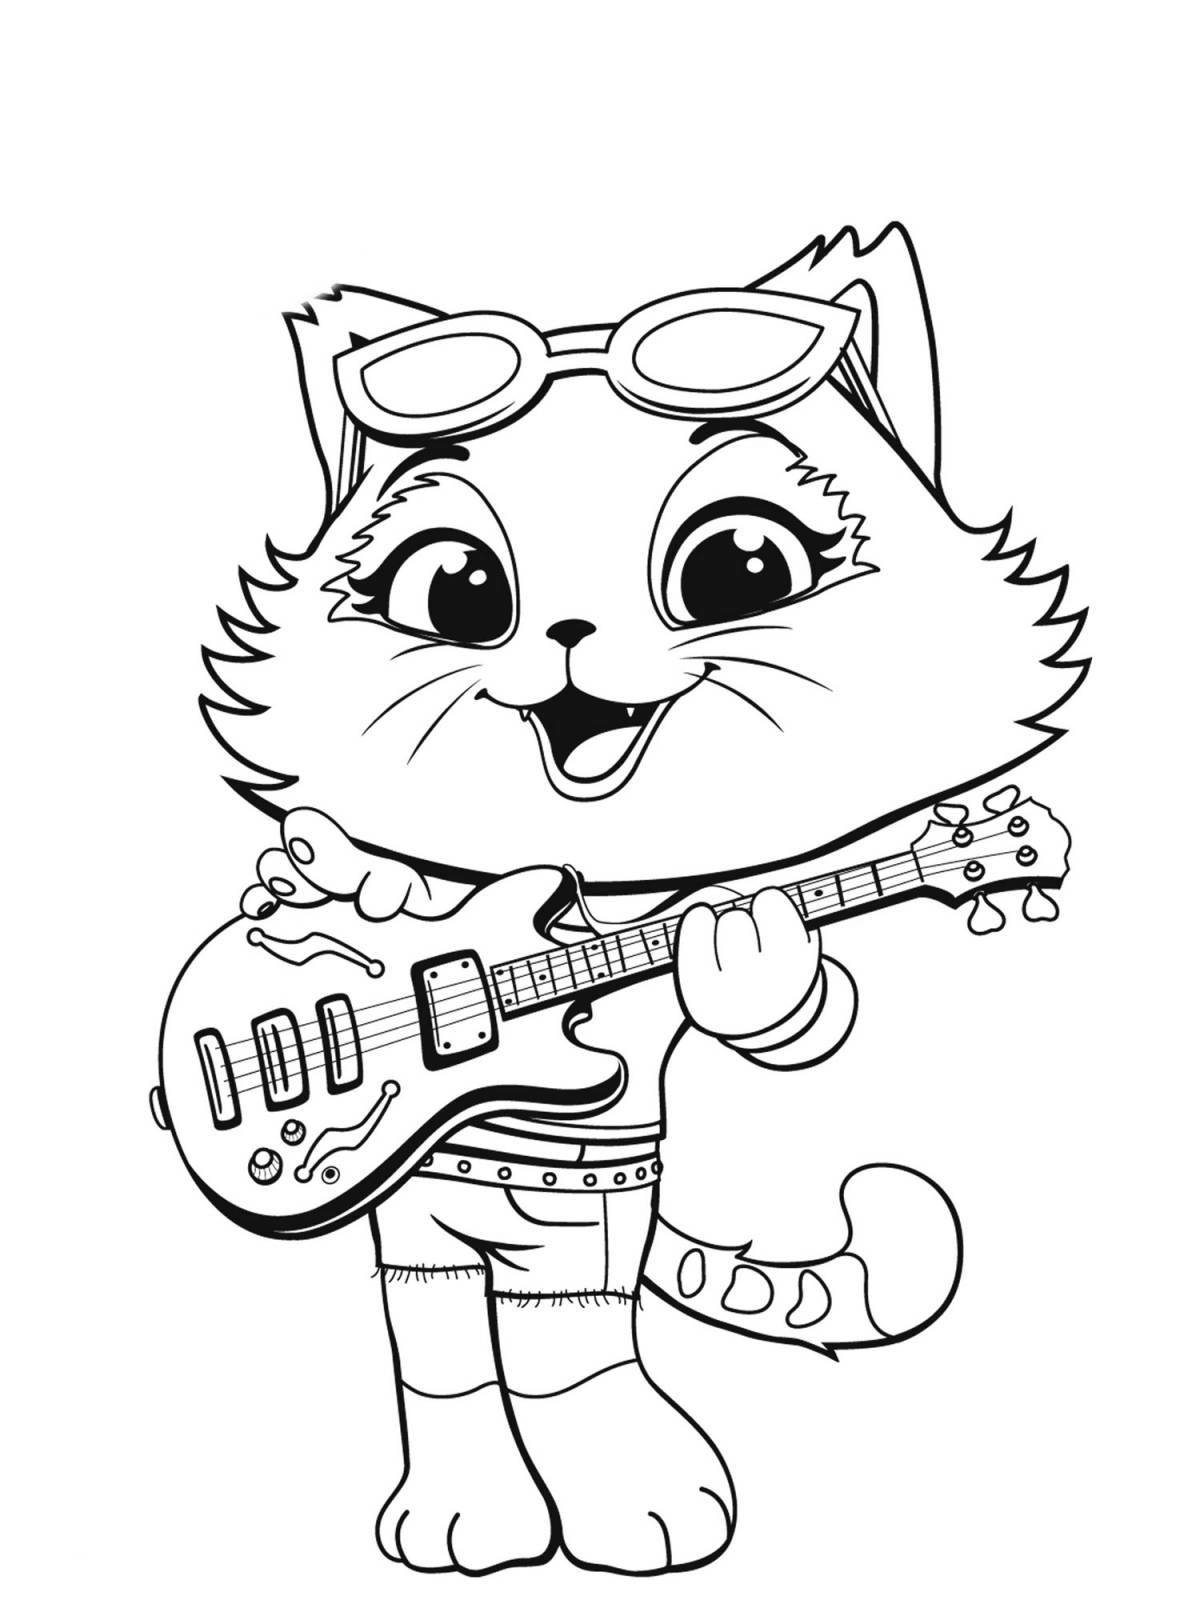 Super meow adorable coloring book for kids